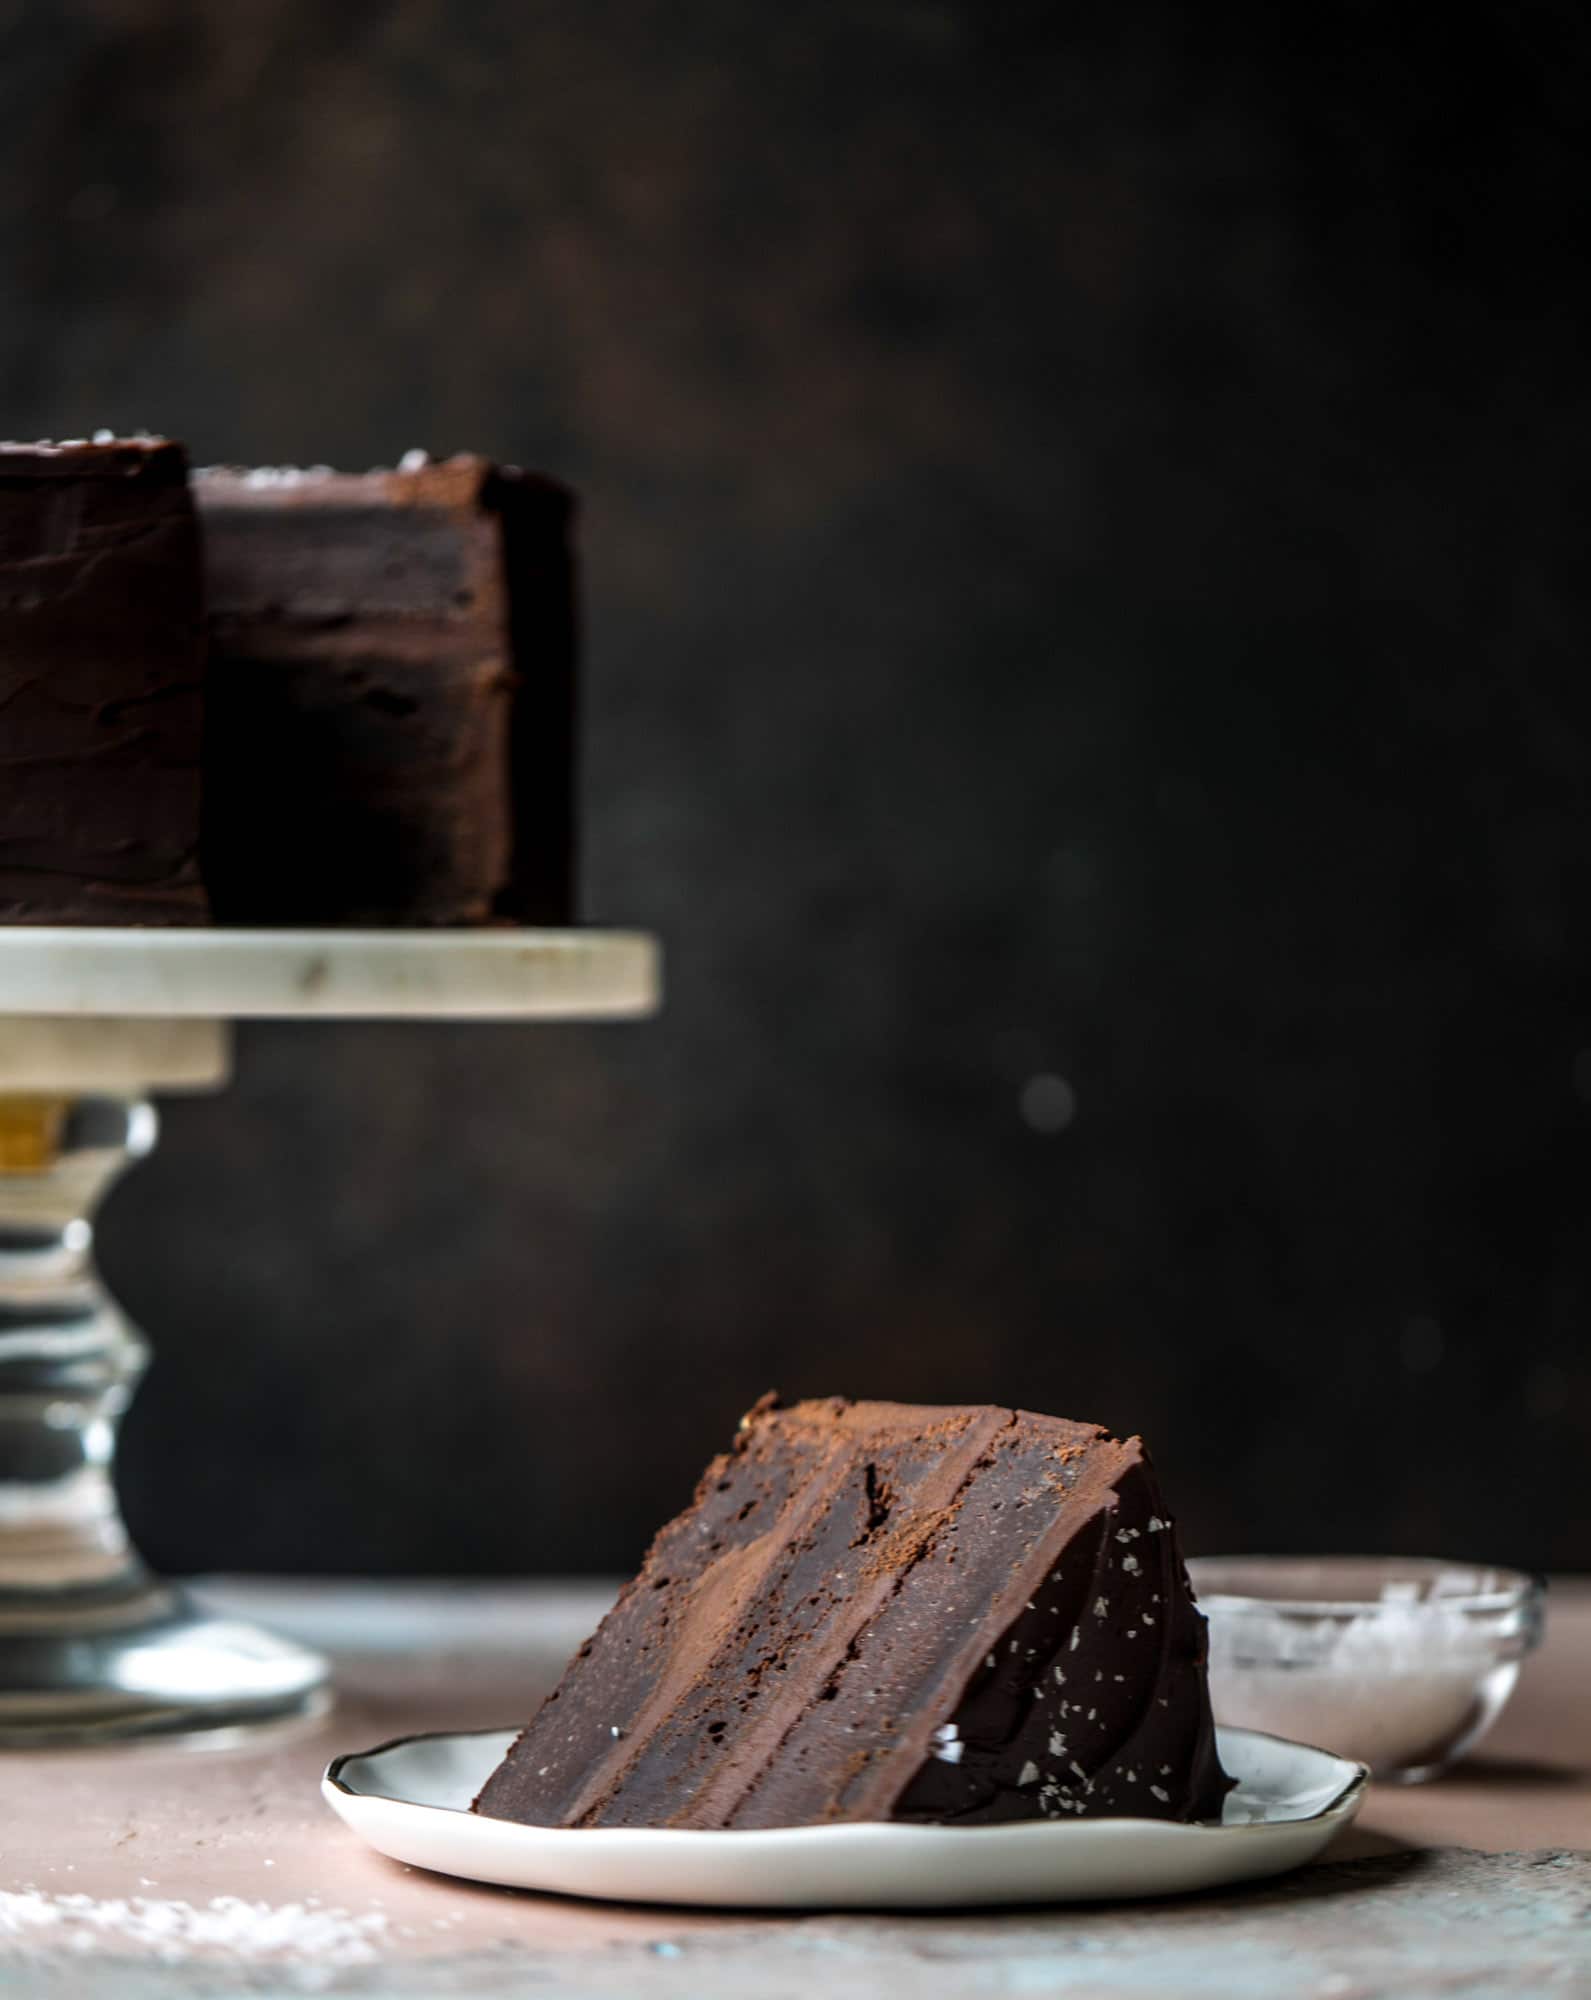 This salted dark chocolate stout cake is absolutely divine! It's ridiculously rich and perfect for a crowd or a party. Pumpkin stout batter is baked into fluffy laters and covered in a super fudgy chocolate ganache. Perfect for chocolate lovers! I howsweeteats.com #dark #chocolate #stout #cake #salted